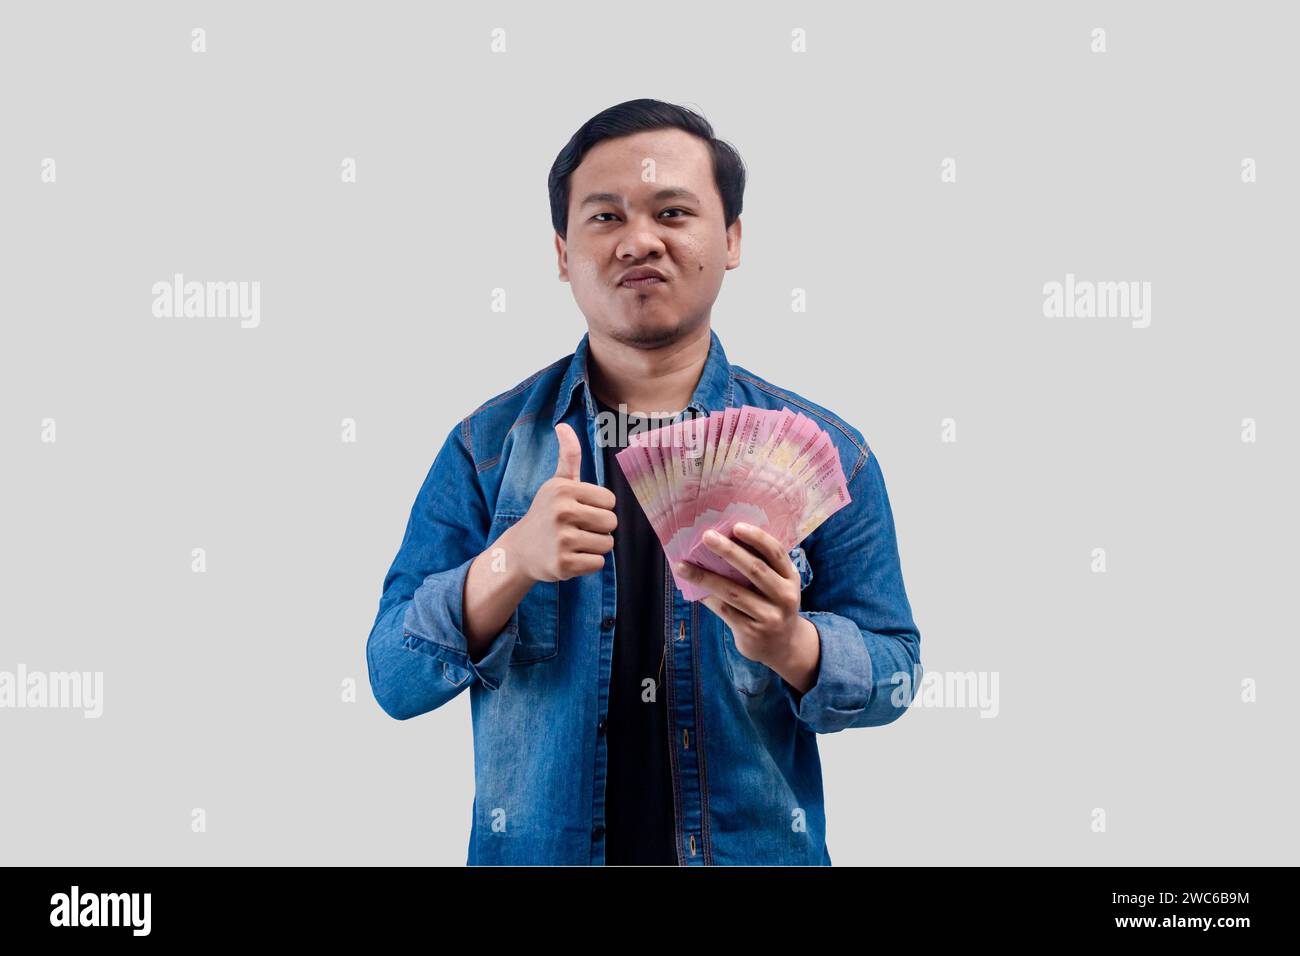 Young Asian man showing arrogant face expression while holding paper money and give a thumbs up Stock Photo